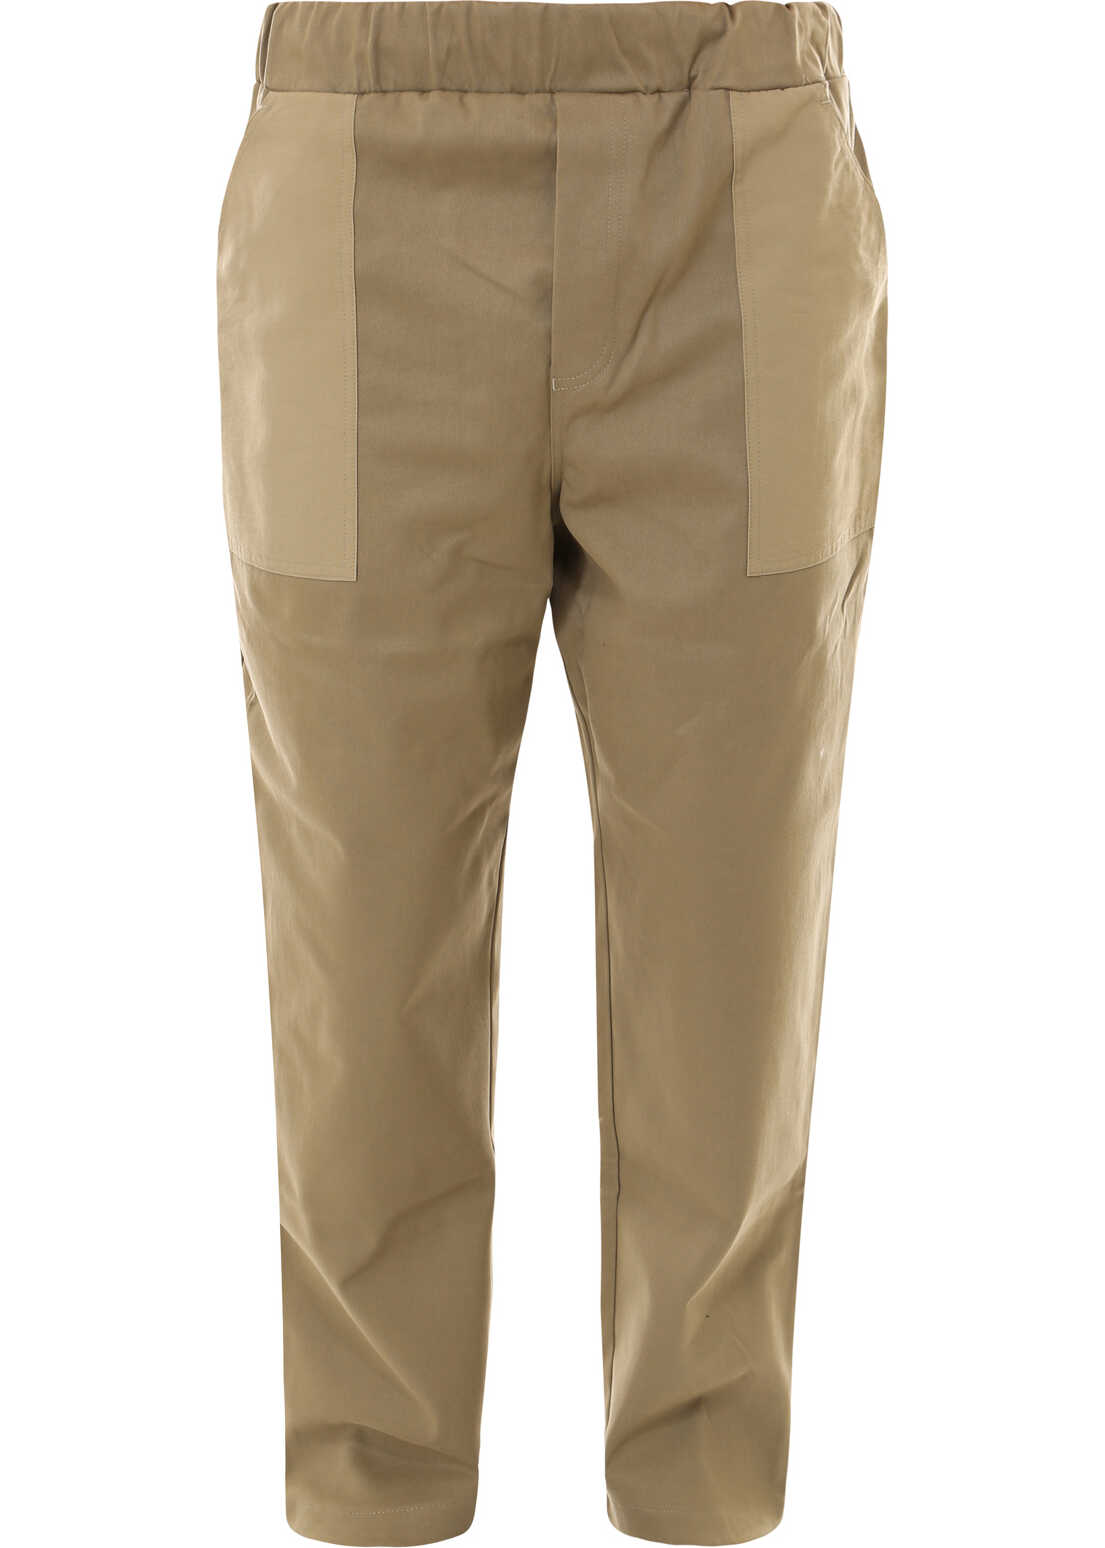 The Silted Company Trouser Beige